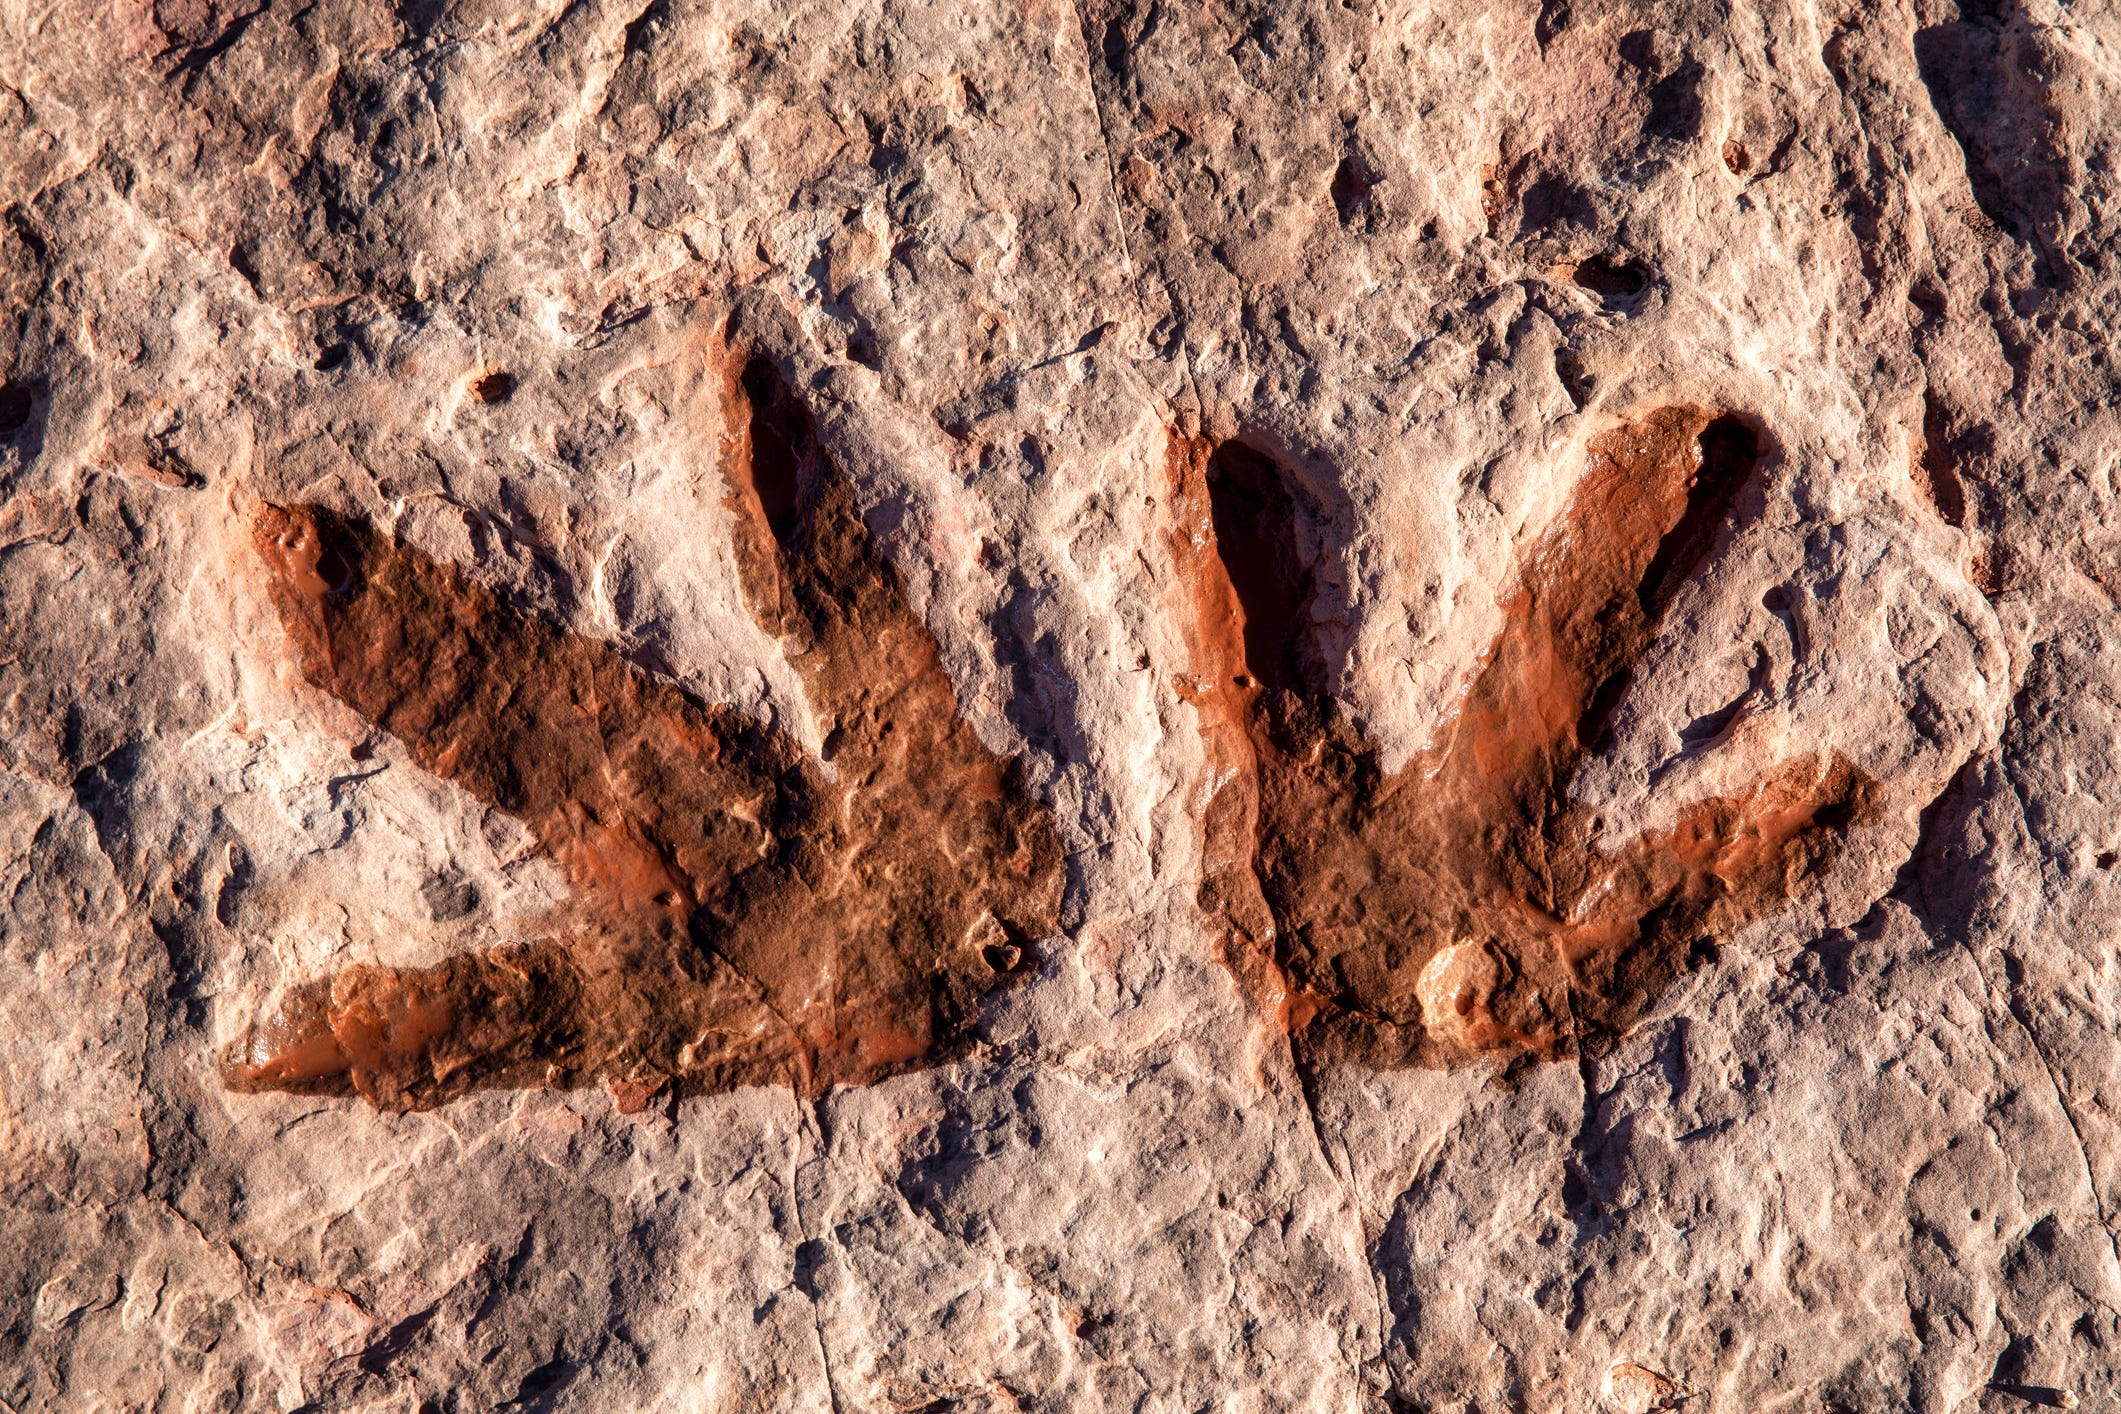 Archaeologists Discovered New Dinosaur Footprints—and Mysterious Symbols Next to Them